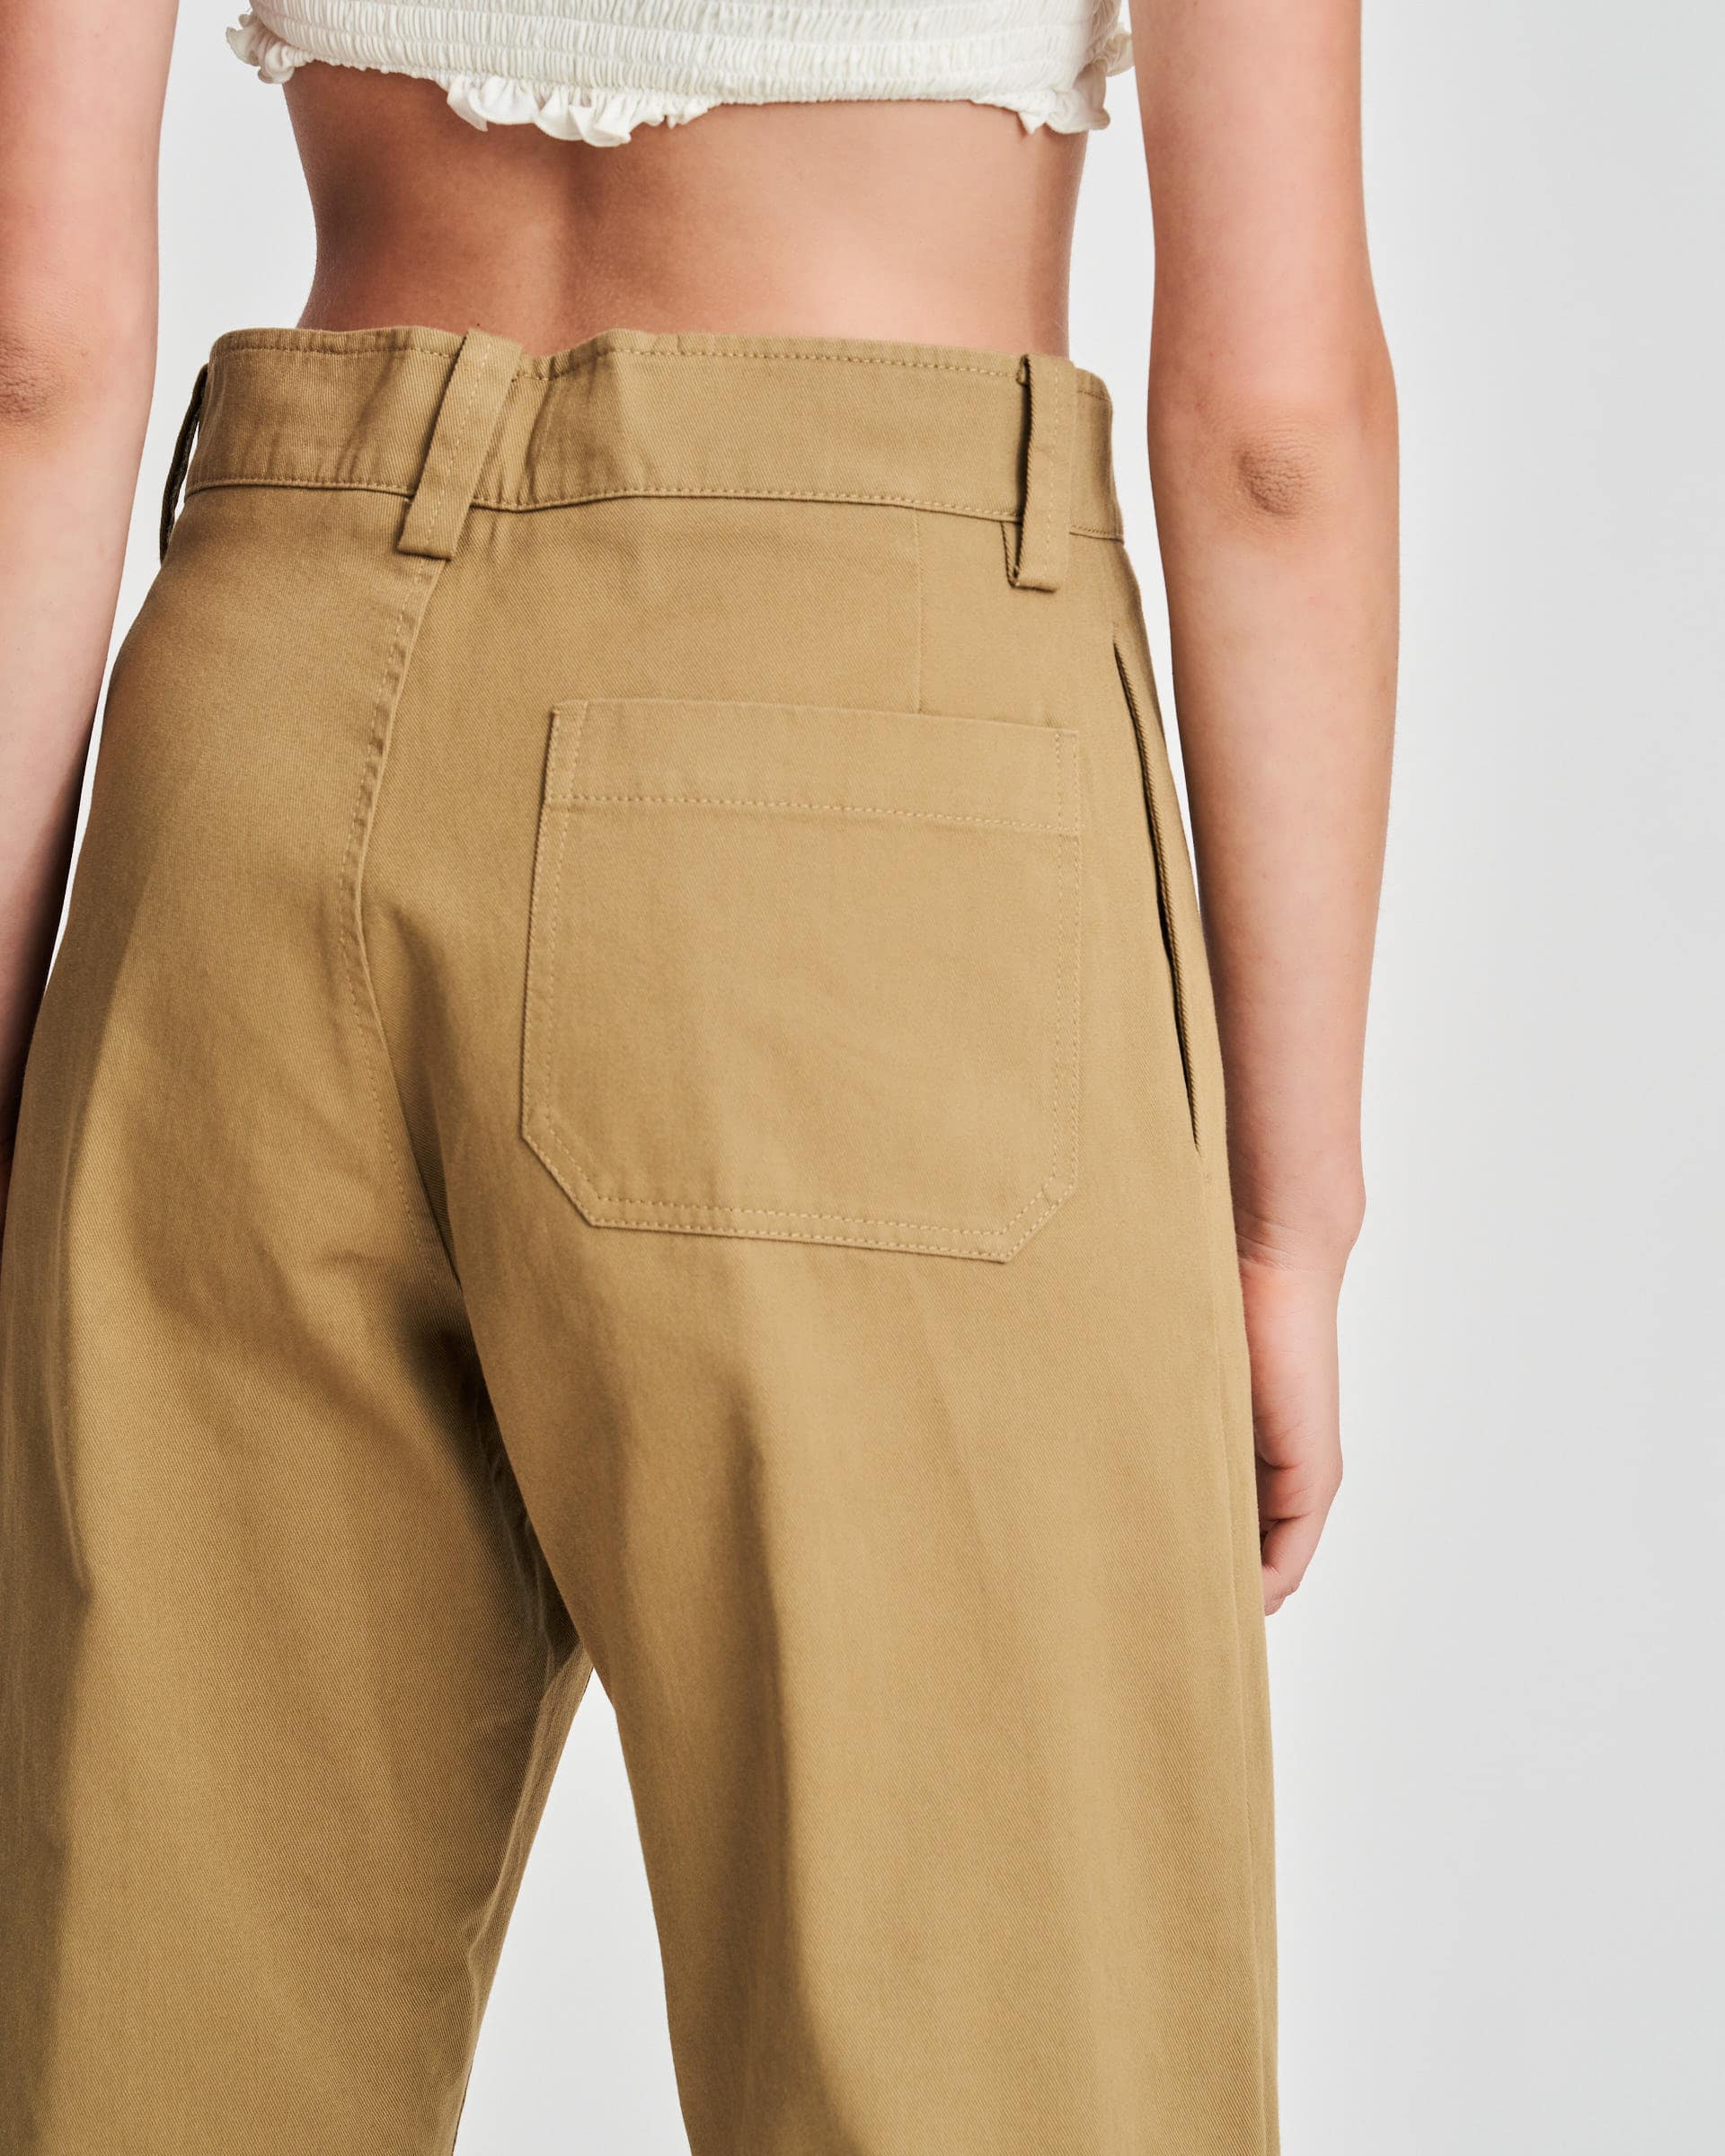 The Market Store | Pants With Back Pocket